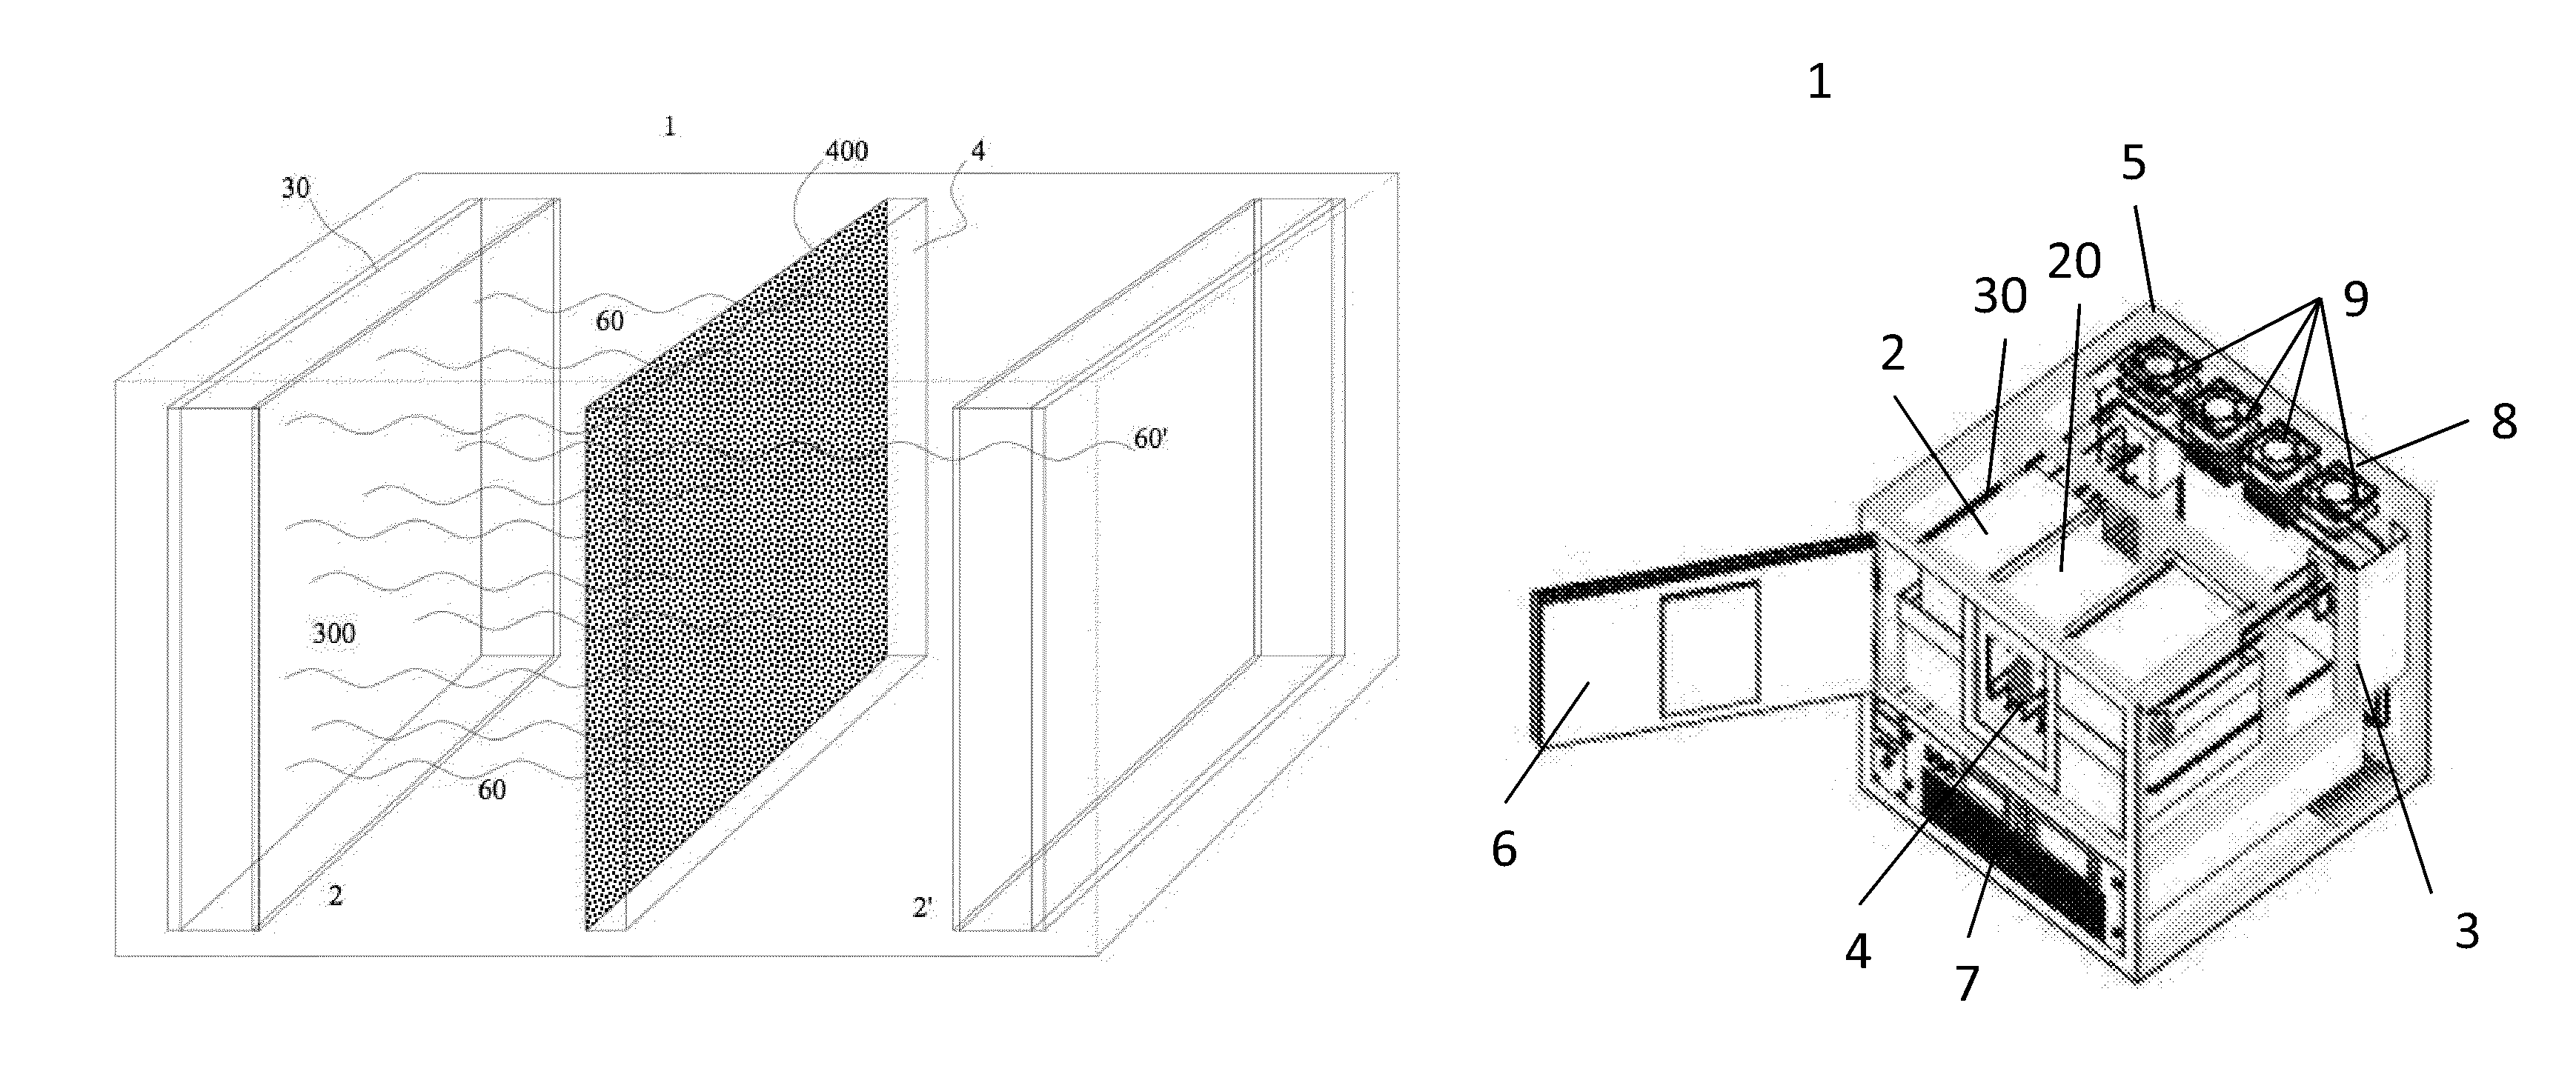 Self contained irradiation system using flat panel X-ray sources